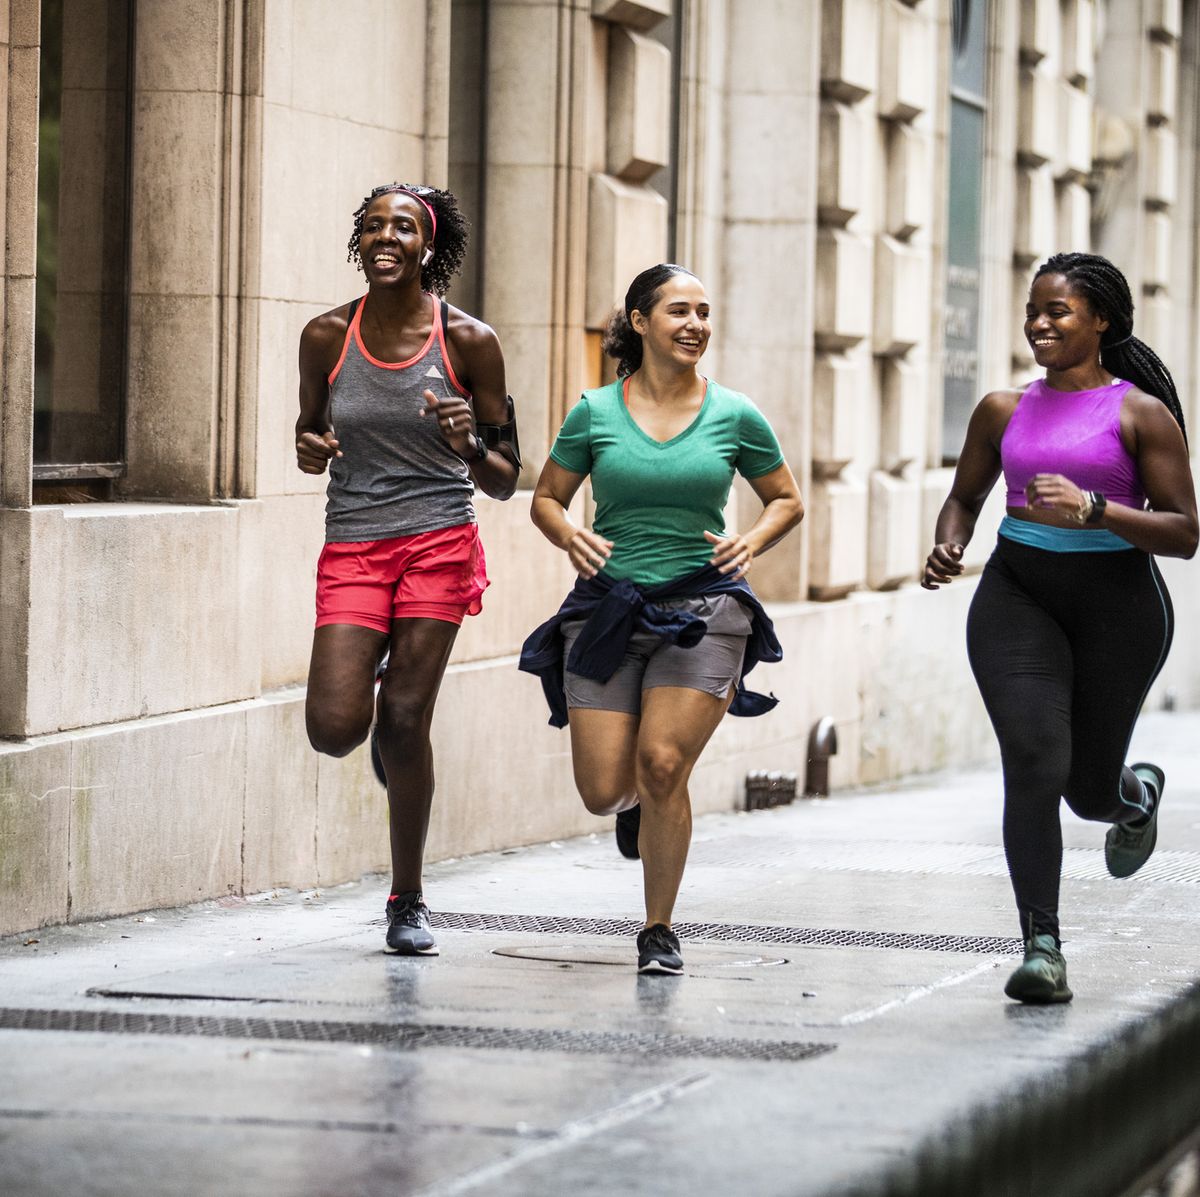 https://hips.hearstapps.com/hmg-prod/images/group-of-women-running-through-urban-area-royalty-free-image-1659458497.jpg?crop=0.668xw:1.00xh;0.244xw,0&resize=1200:*